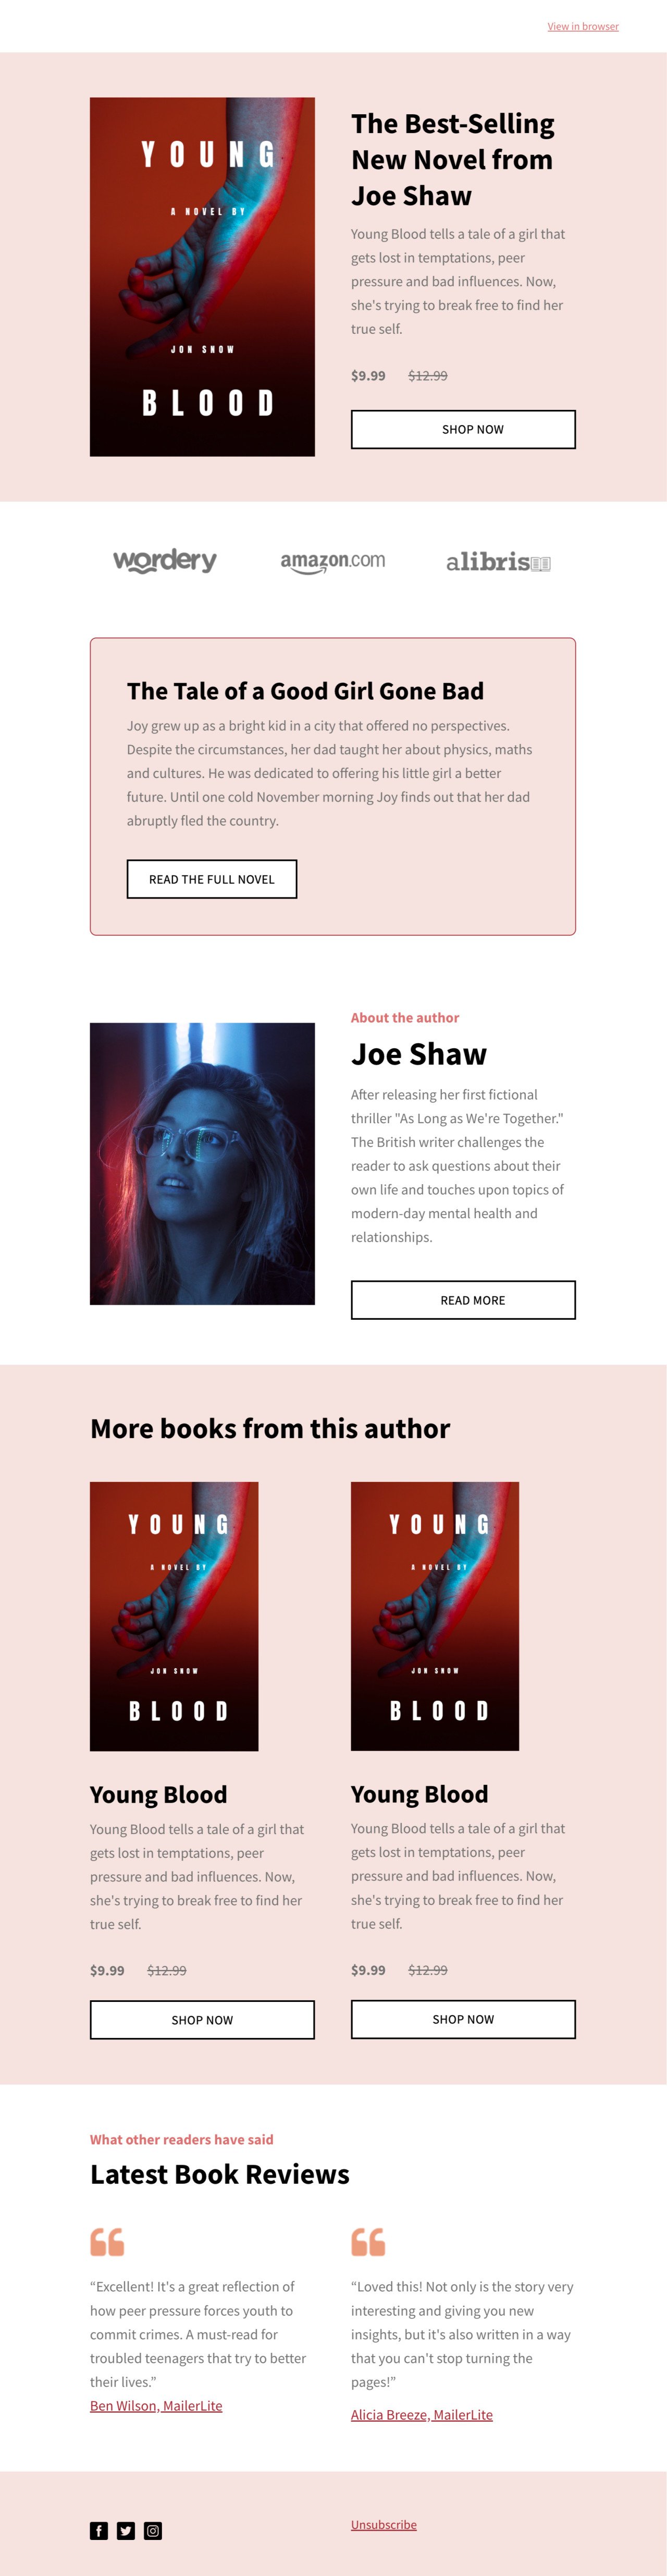 Book promotion template - Made by MailerLite